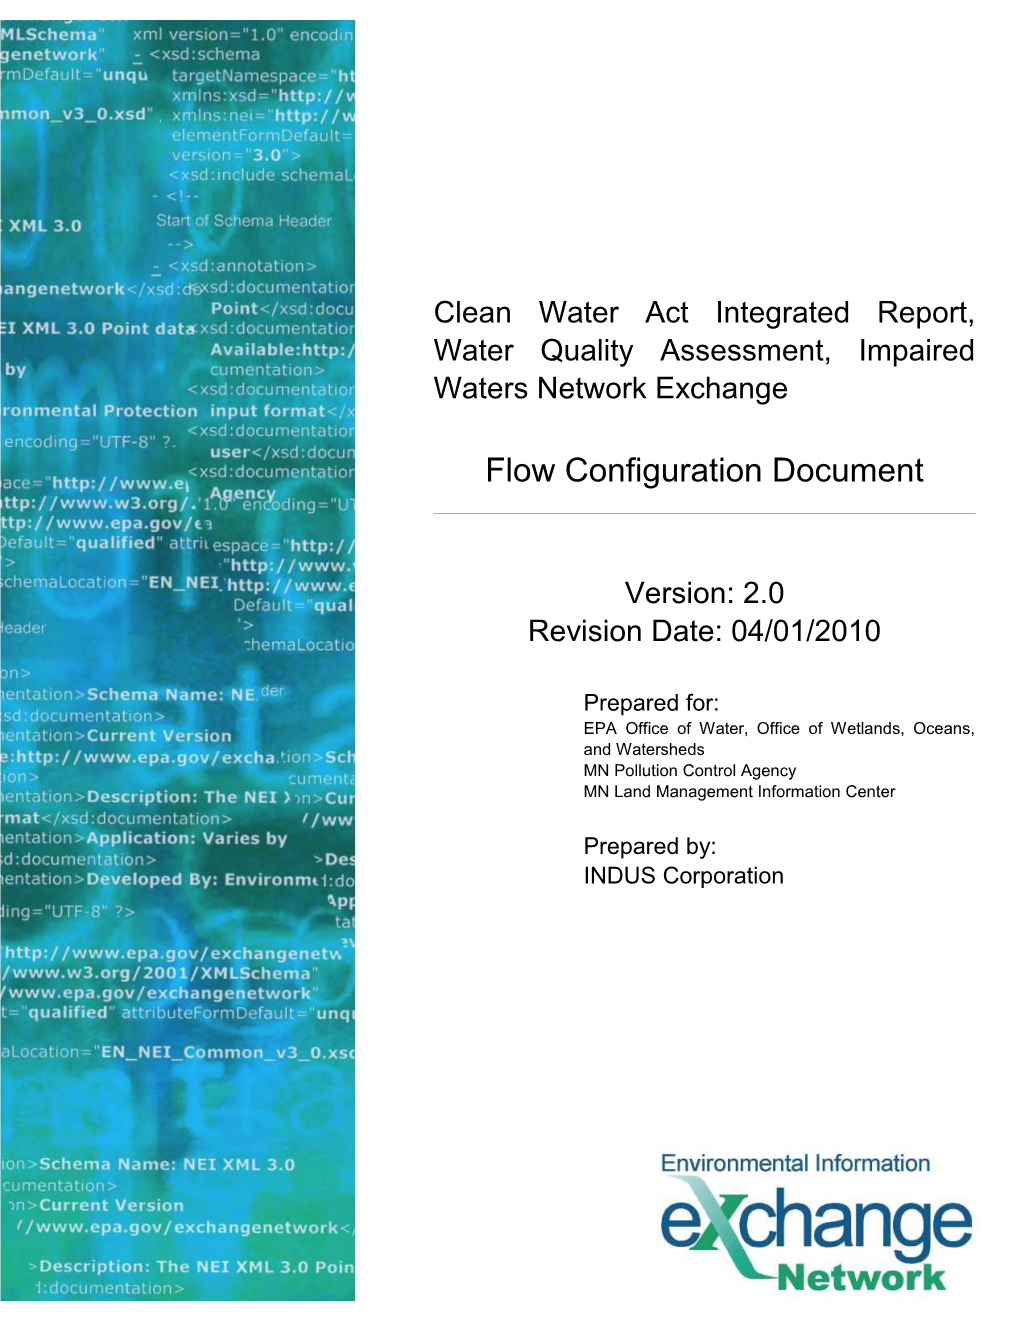 Office of Water Integrated Report Flow Configuration Document